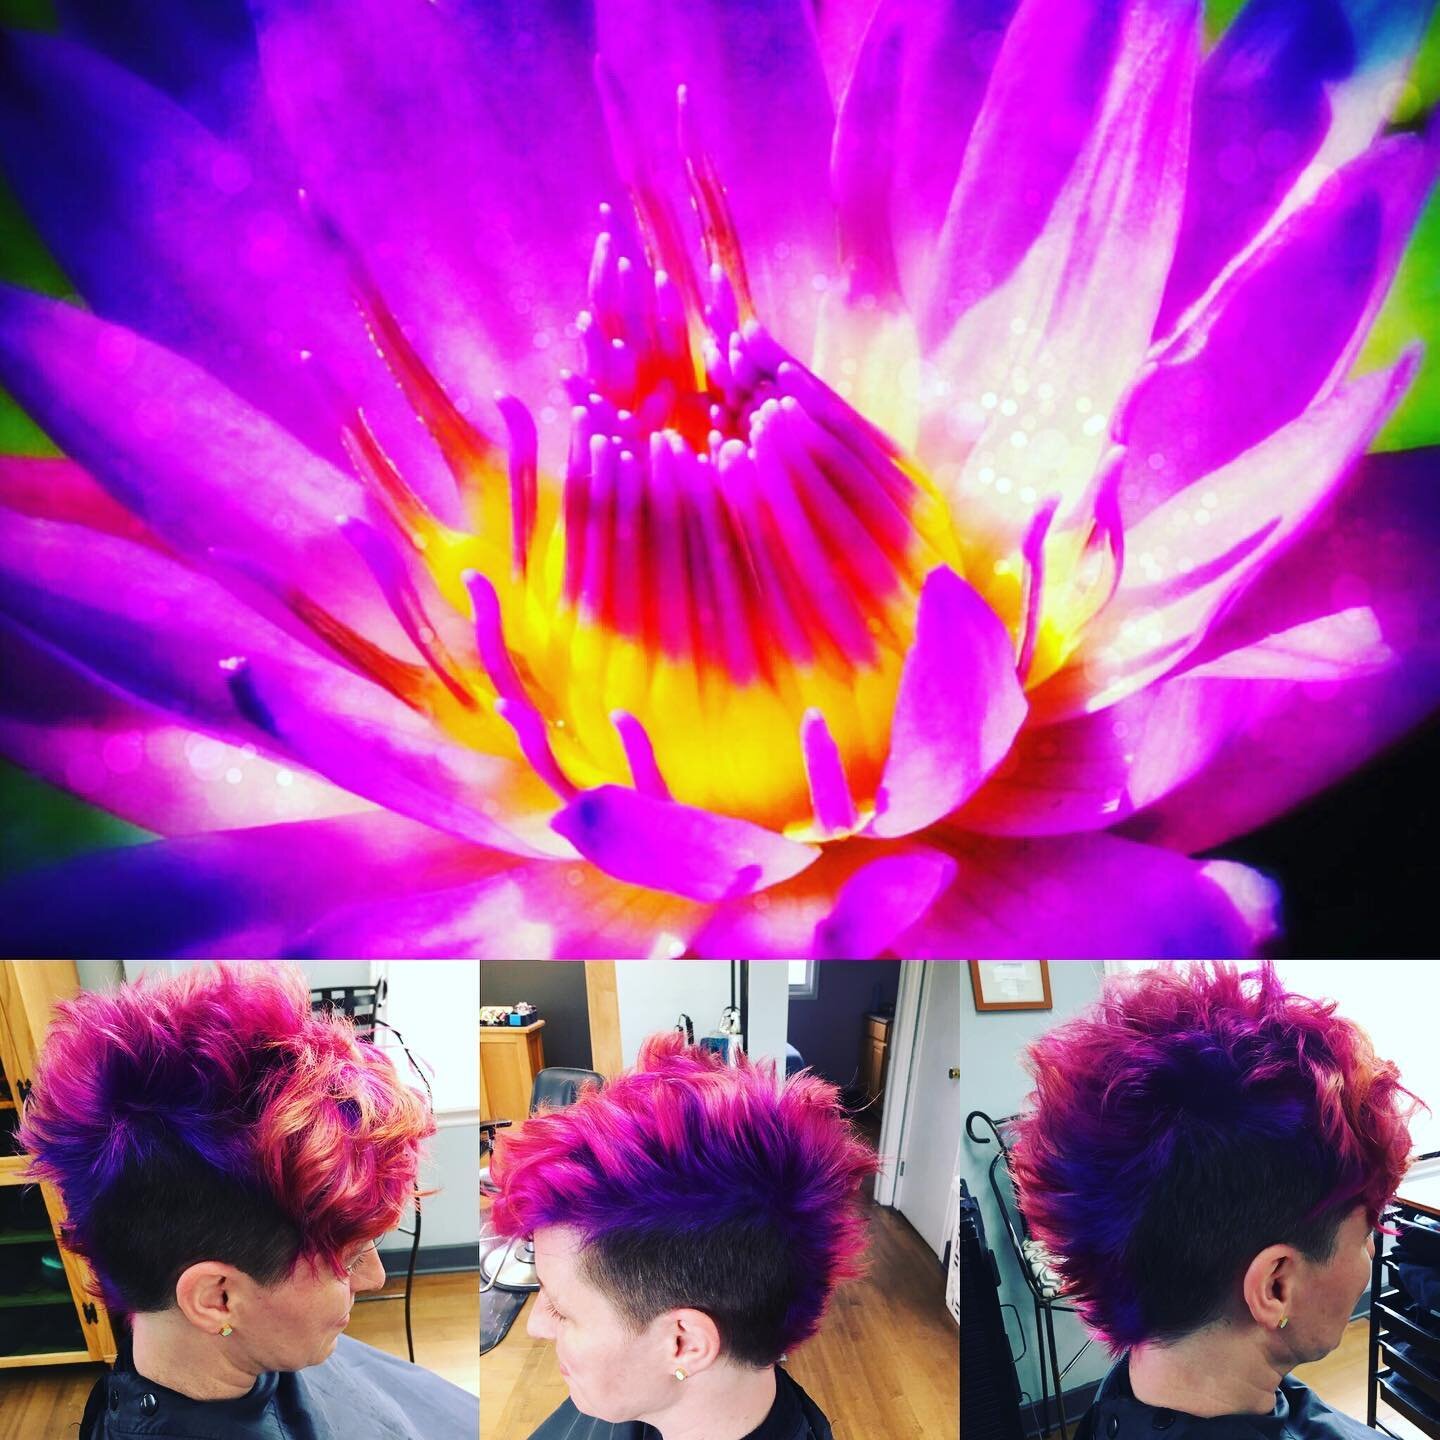 sometime you just get to have loads of fun at work and use nature to inspire creativity #inspiration #lotusflower #lovewhatido #iamahairstylist #lovecolour #fashioncolor